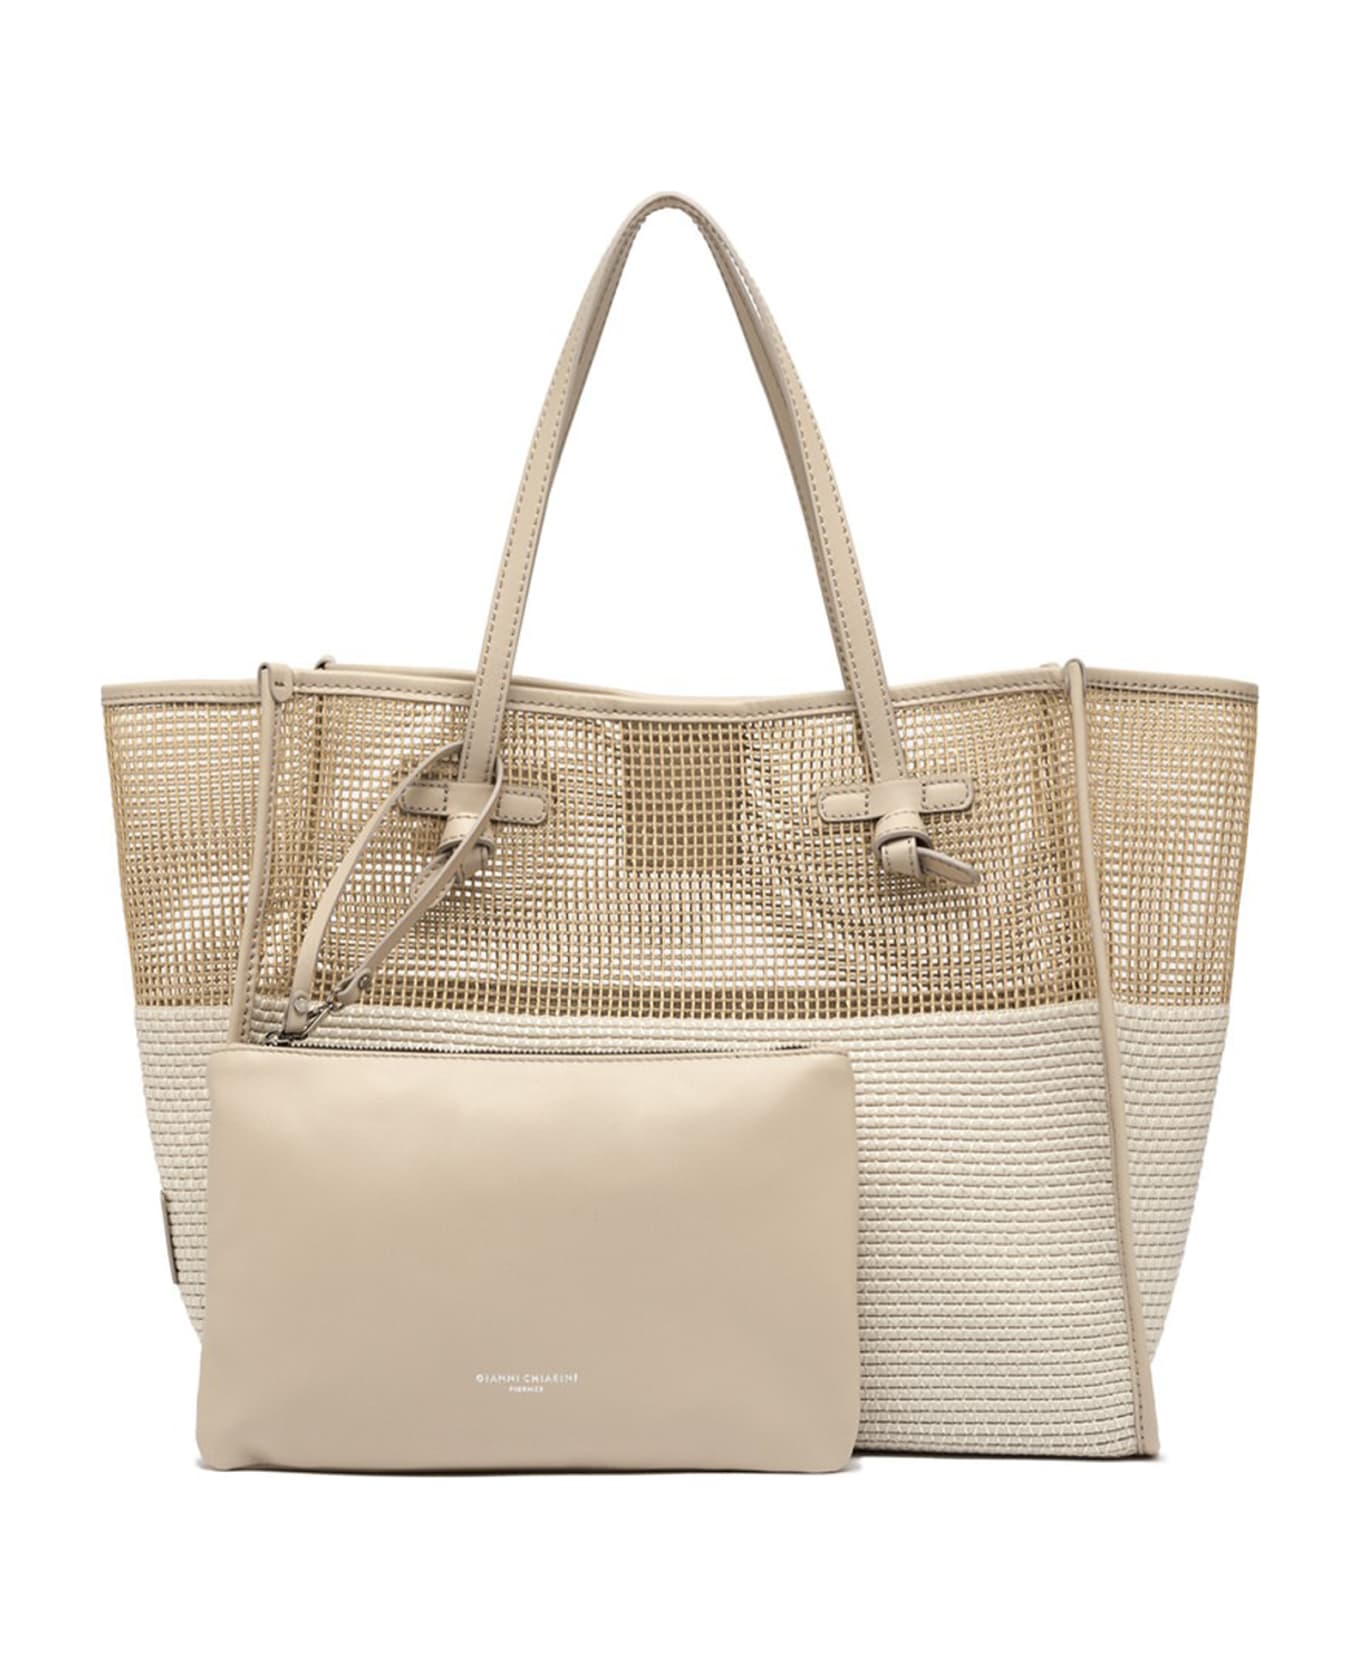 Gianni Chiarini Marcella Shopping Bag In Two-color Mesh Effect Fabric - PANNA トートバッグ